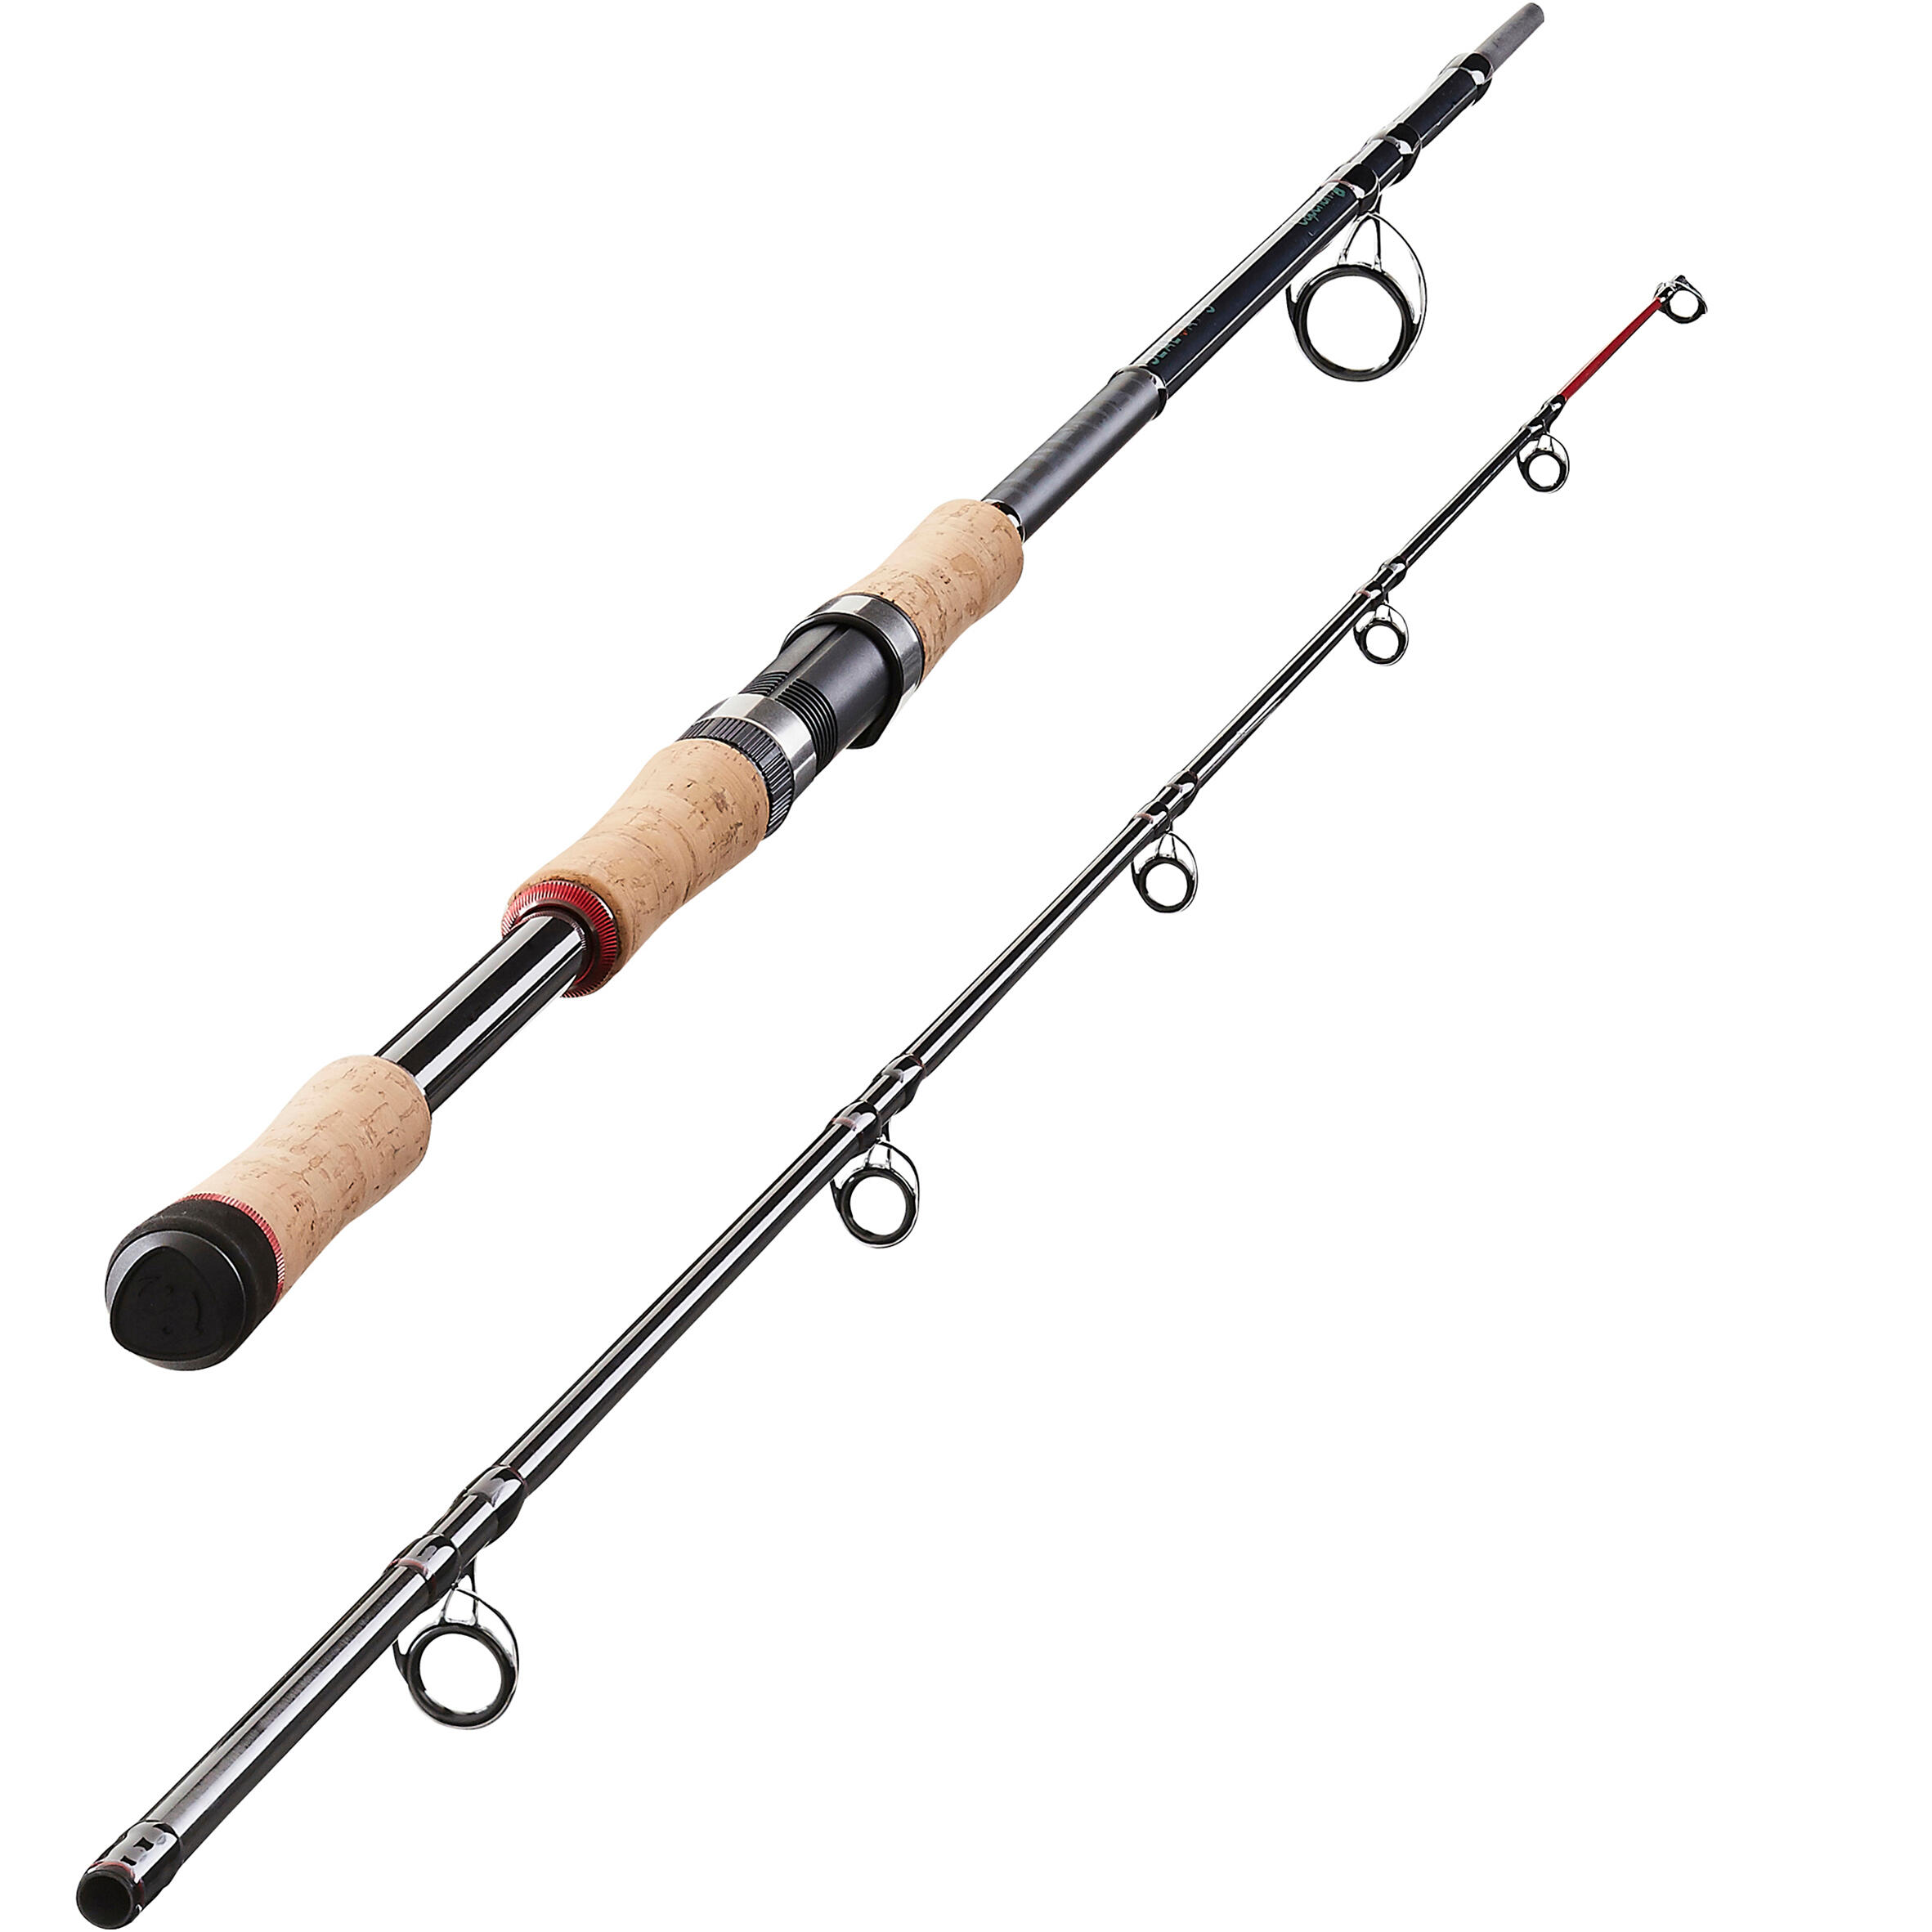  Fishing Rod, Cork Handle, Rod Parts, Fishing Rod, Repair  Parts, Easy to Grip : Sports & Outdoors